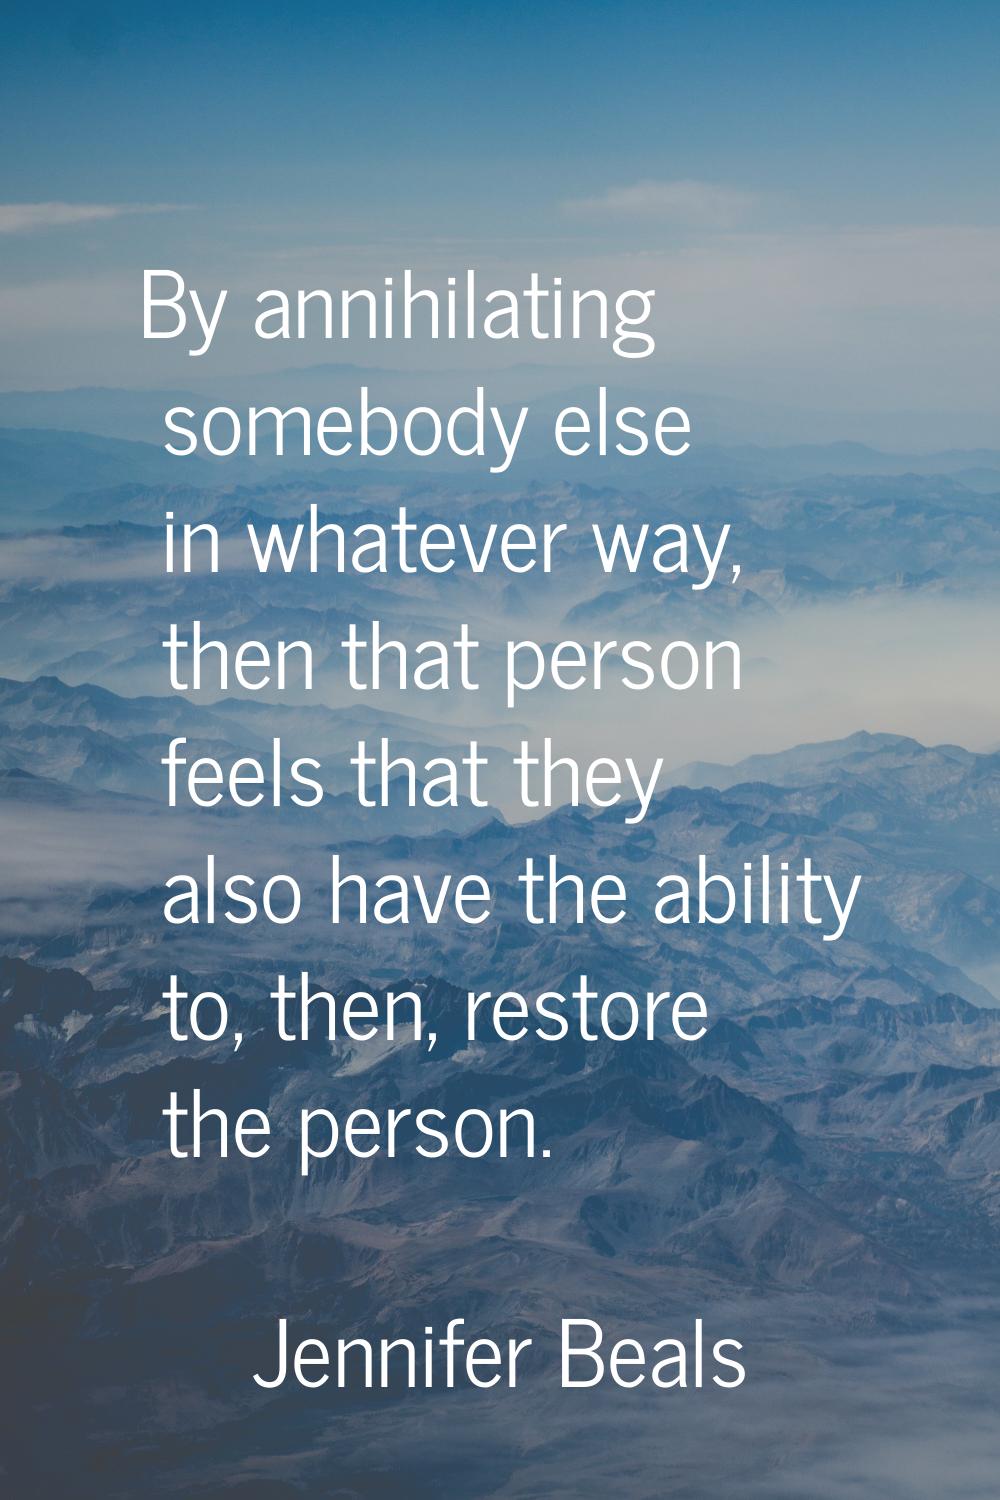 By annihilating somebody else in whatever way, then that person feels that they also have the abili